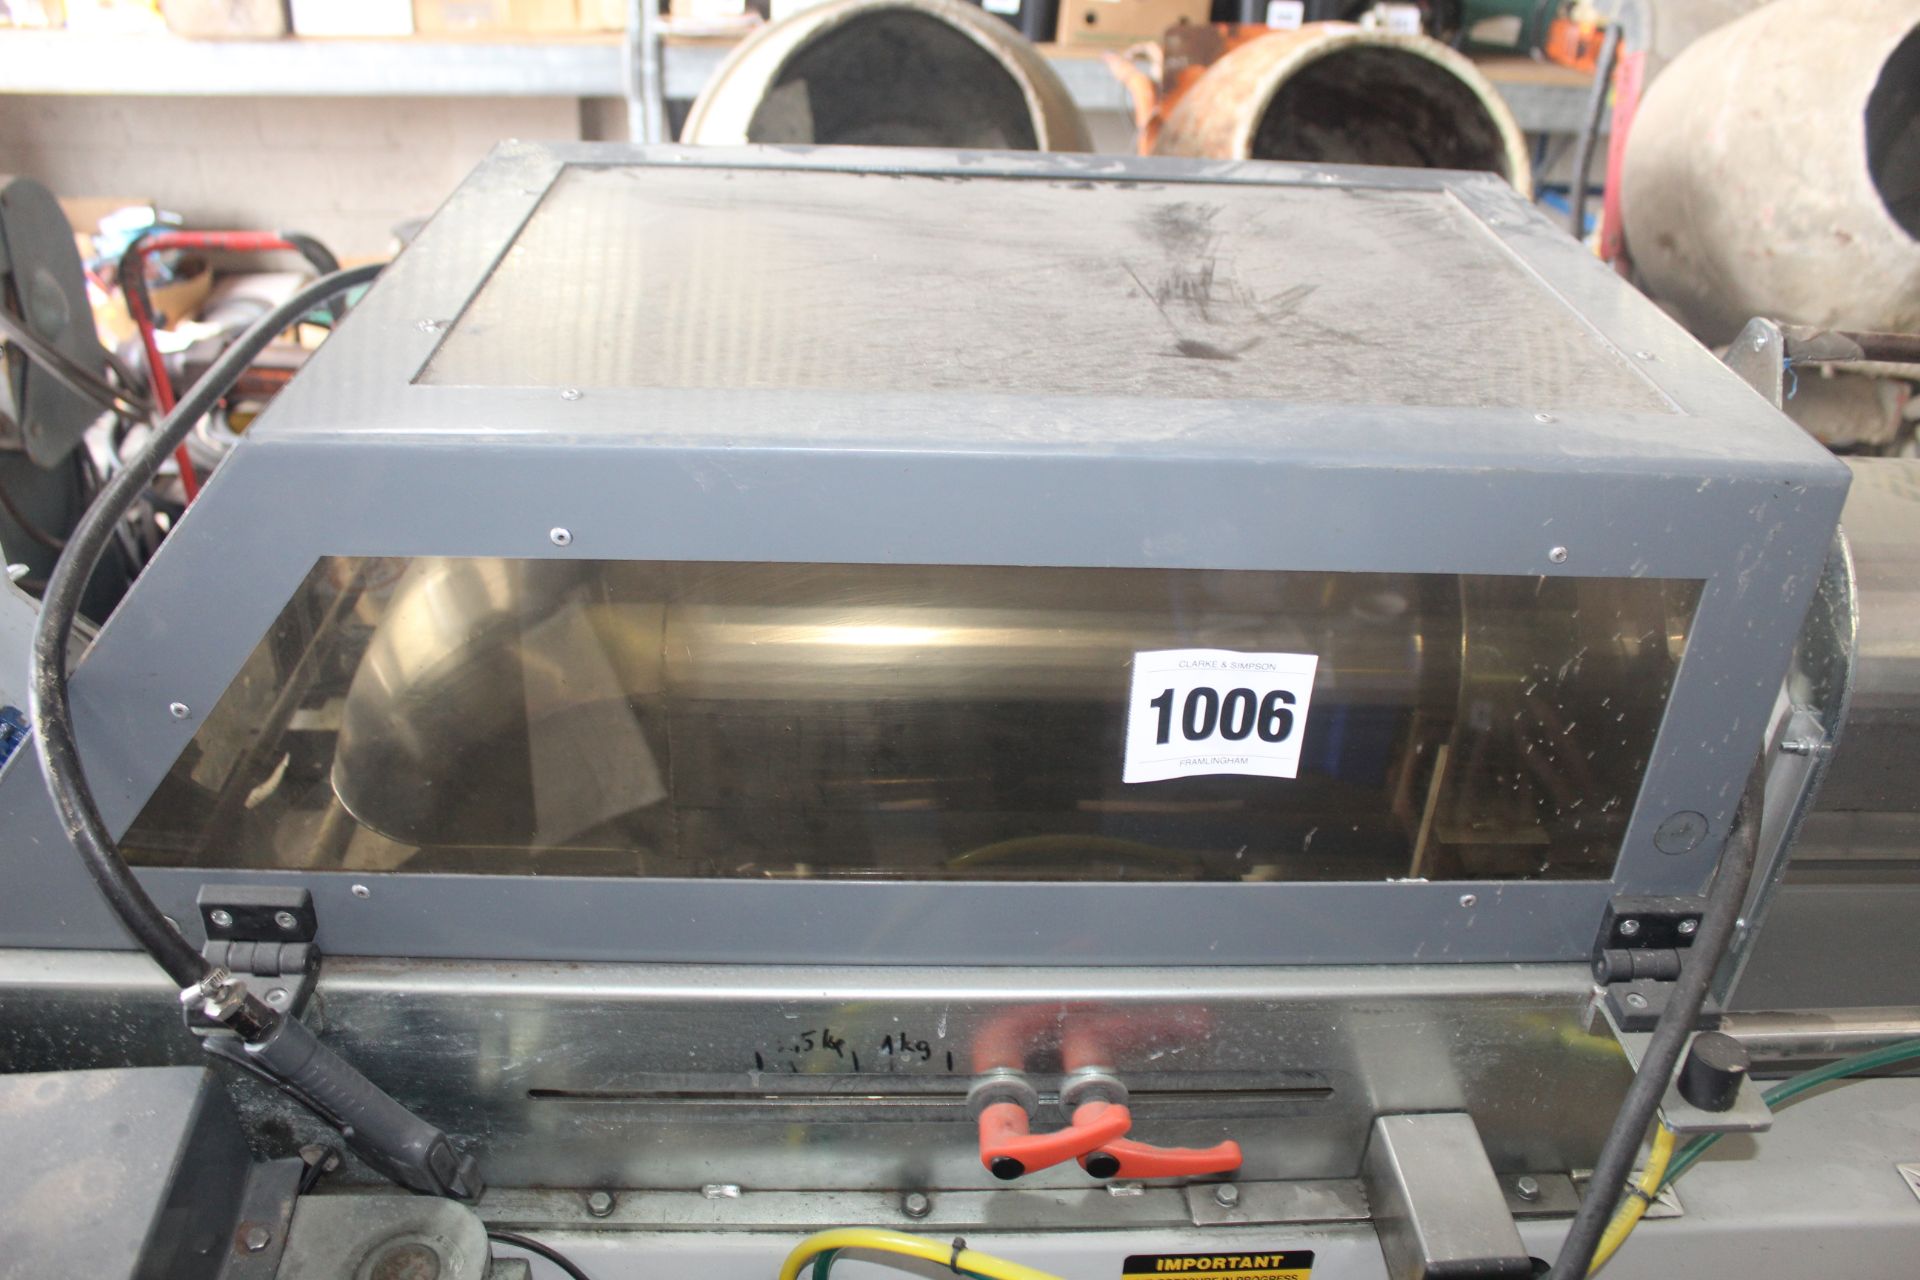 Sorma KB GX 140 produce netting machine. With label printer and output elevator. - Image 7 of 28